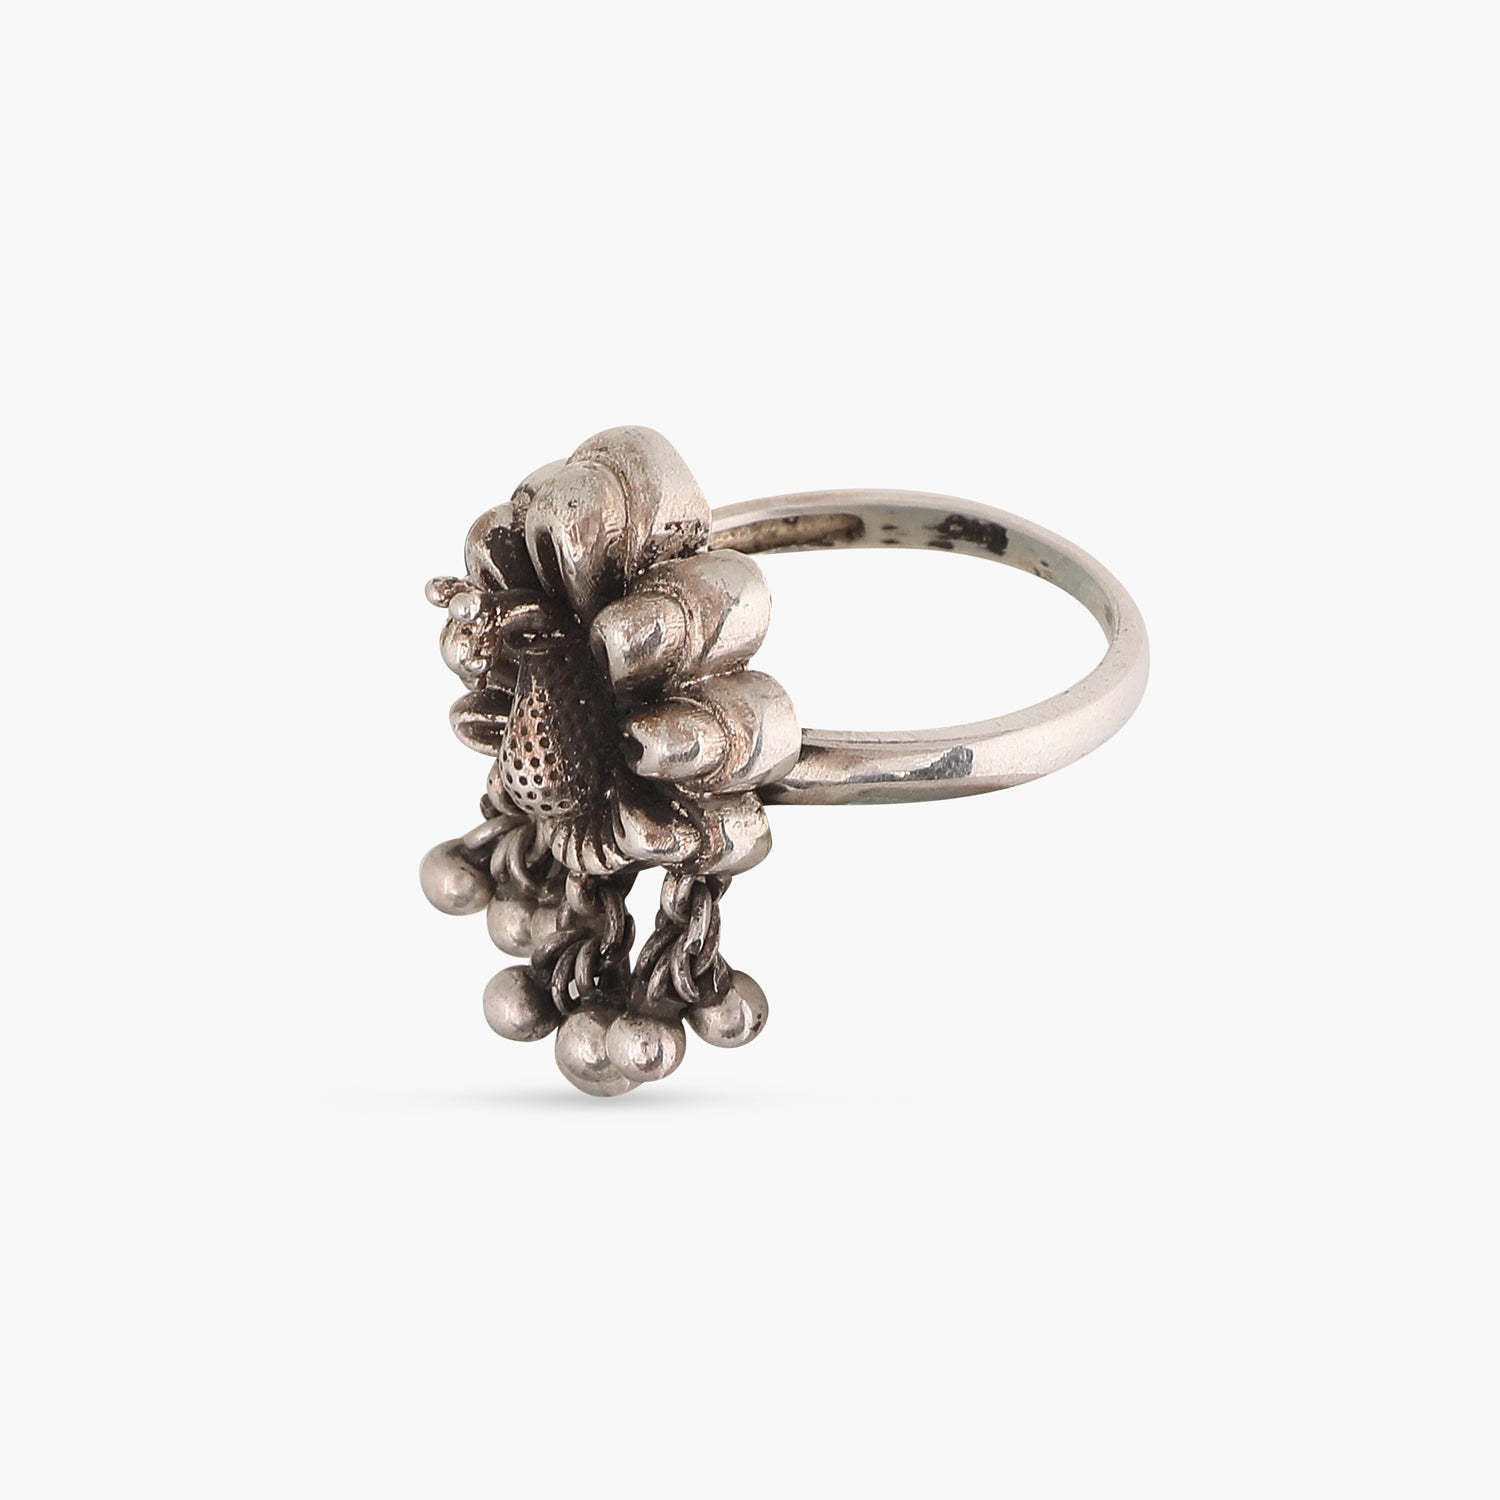 Oxidised Silver Contemporary Oxidized Metal Womens Finger Ring -